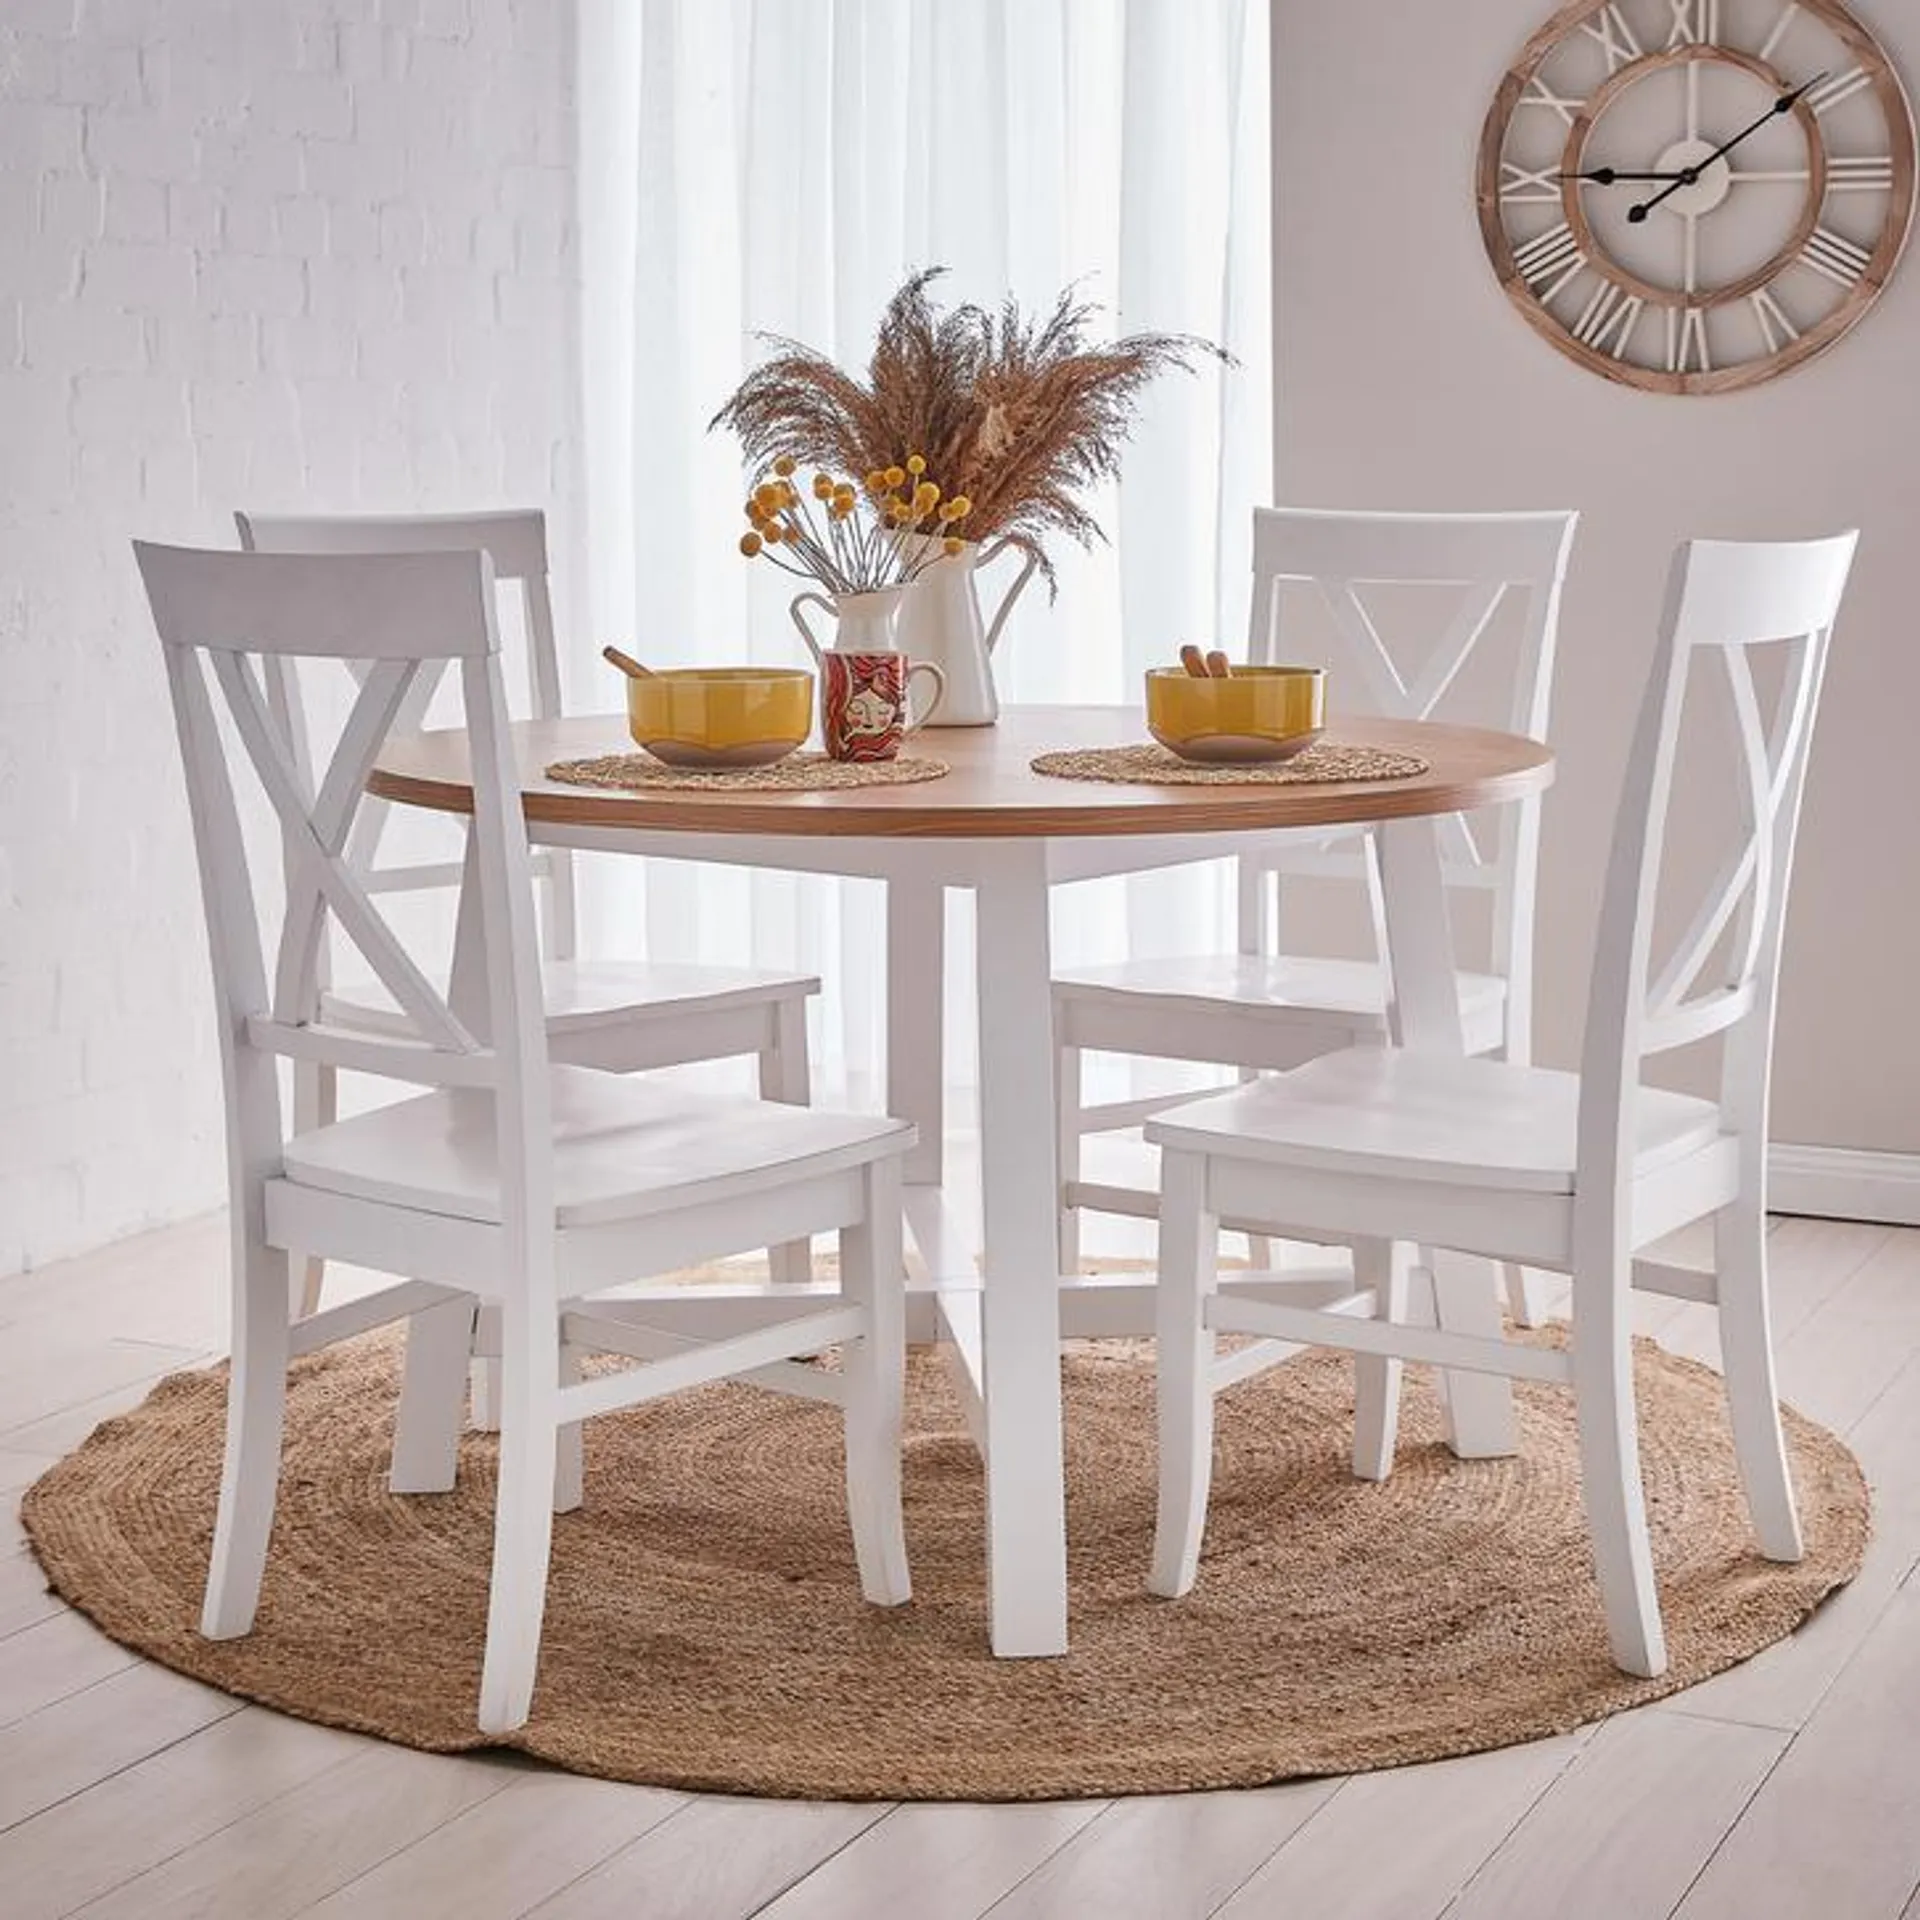 Newhaven 4 Seater Dining Set